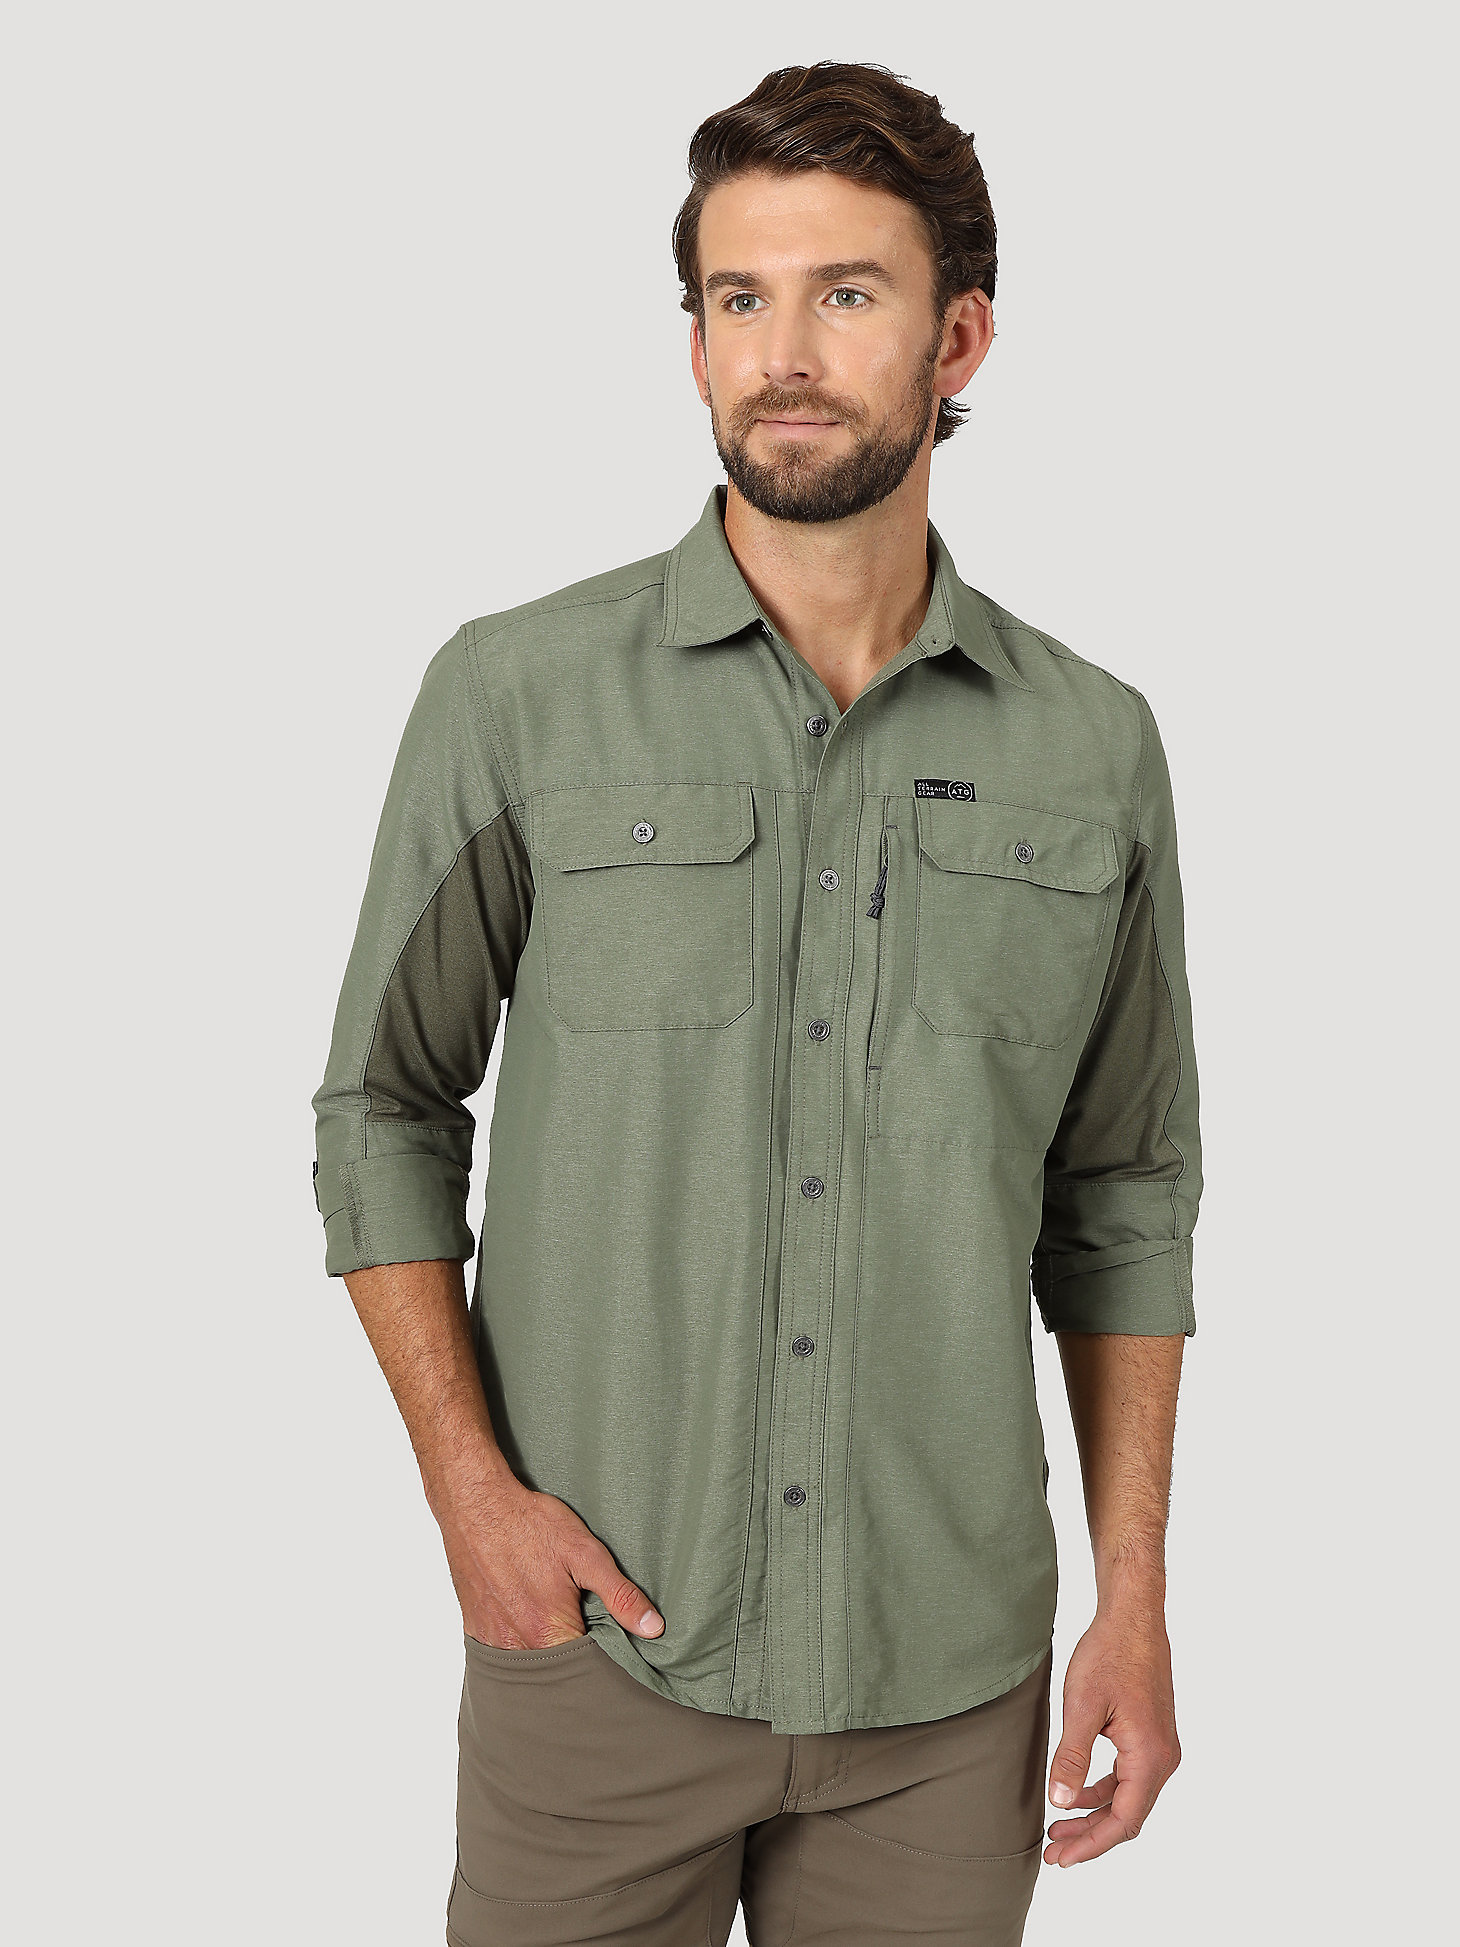 ATG by Wrangler™ Men's Mix Material Shirt in Dusty Olive alternative view 1